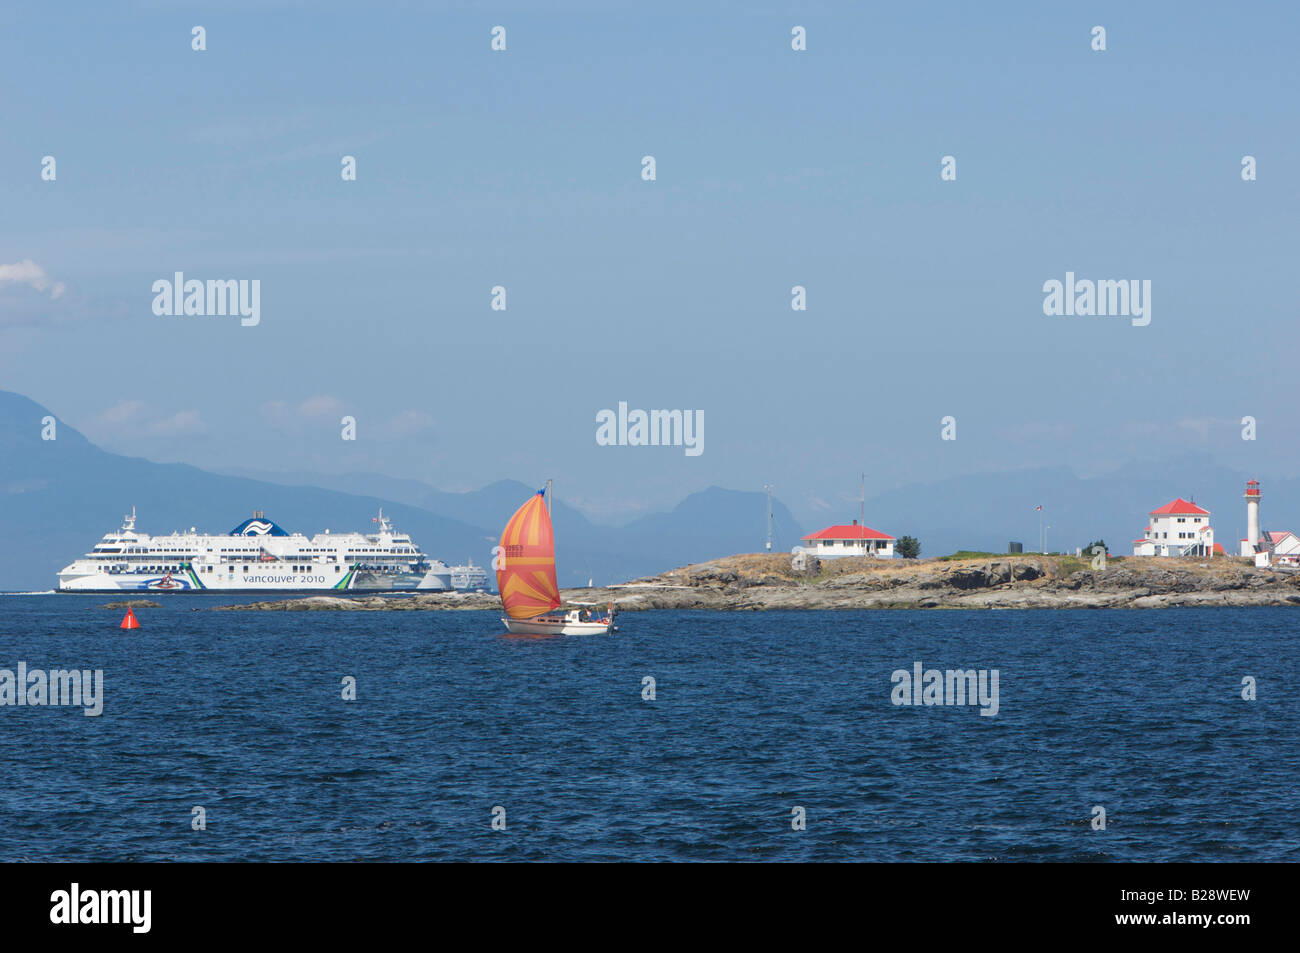 Sailboat with Entrance Island and BC Ferry Stock Photo